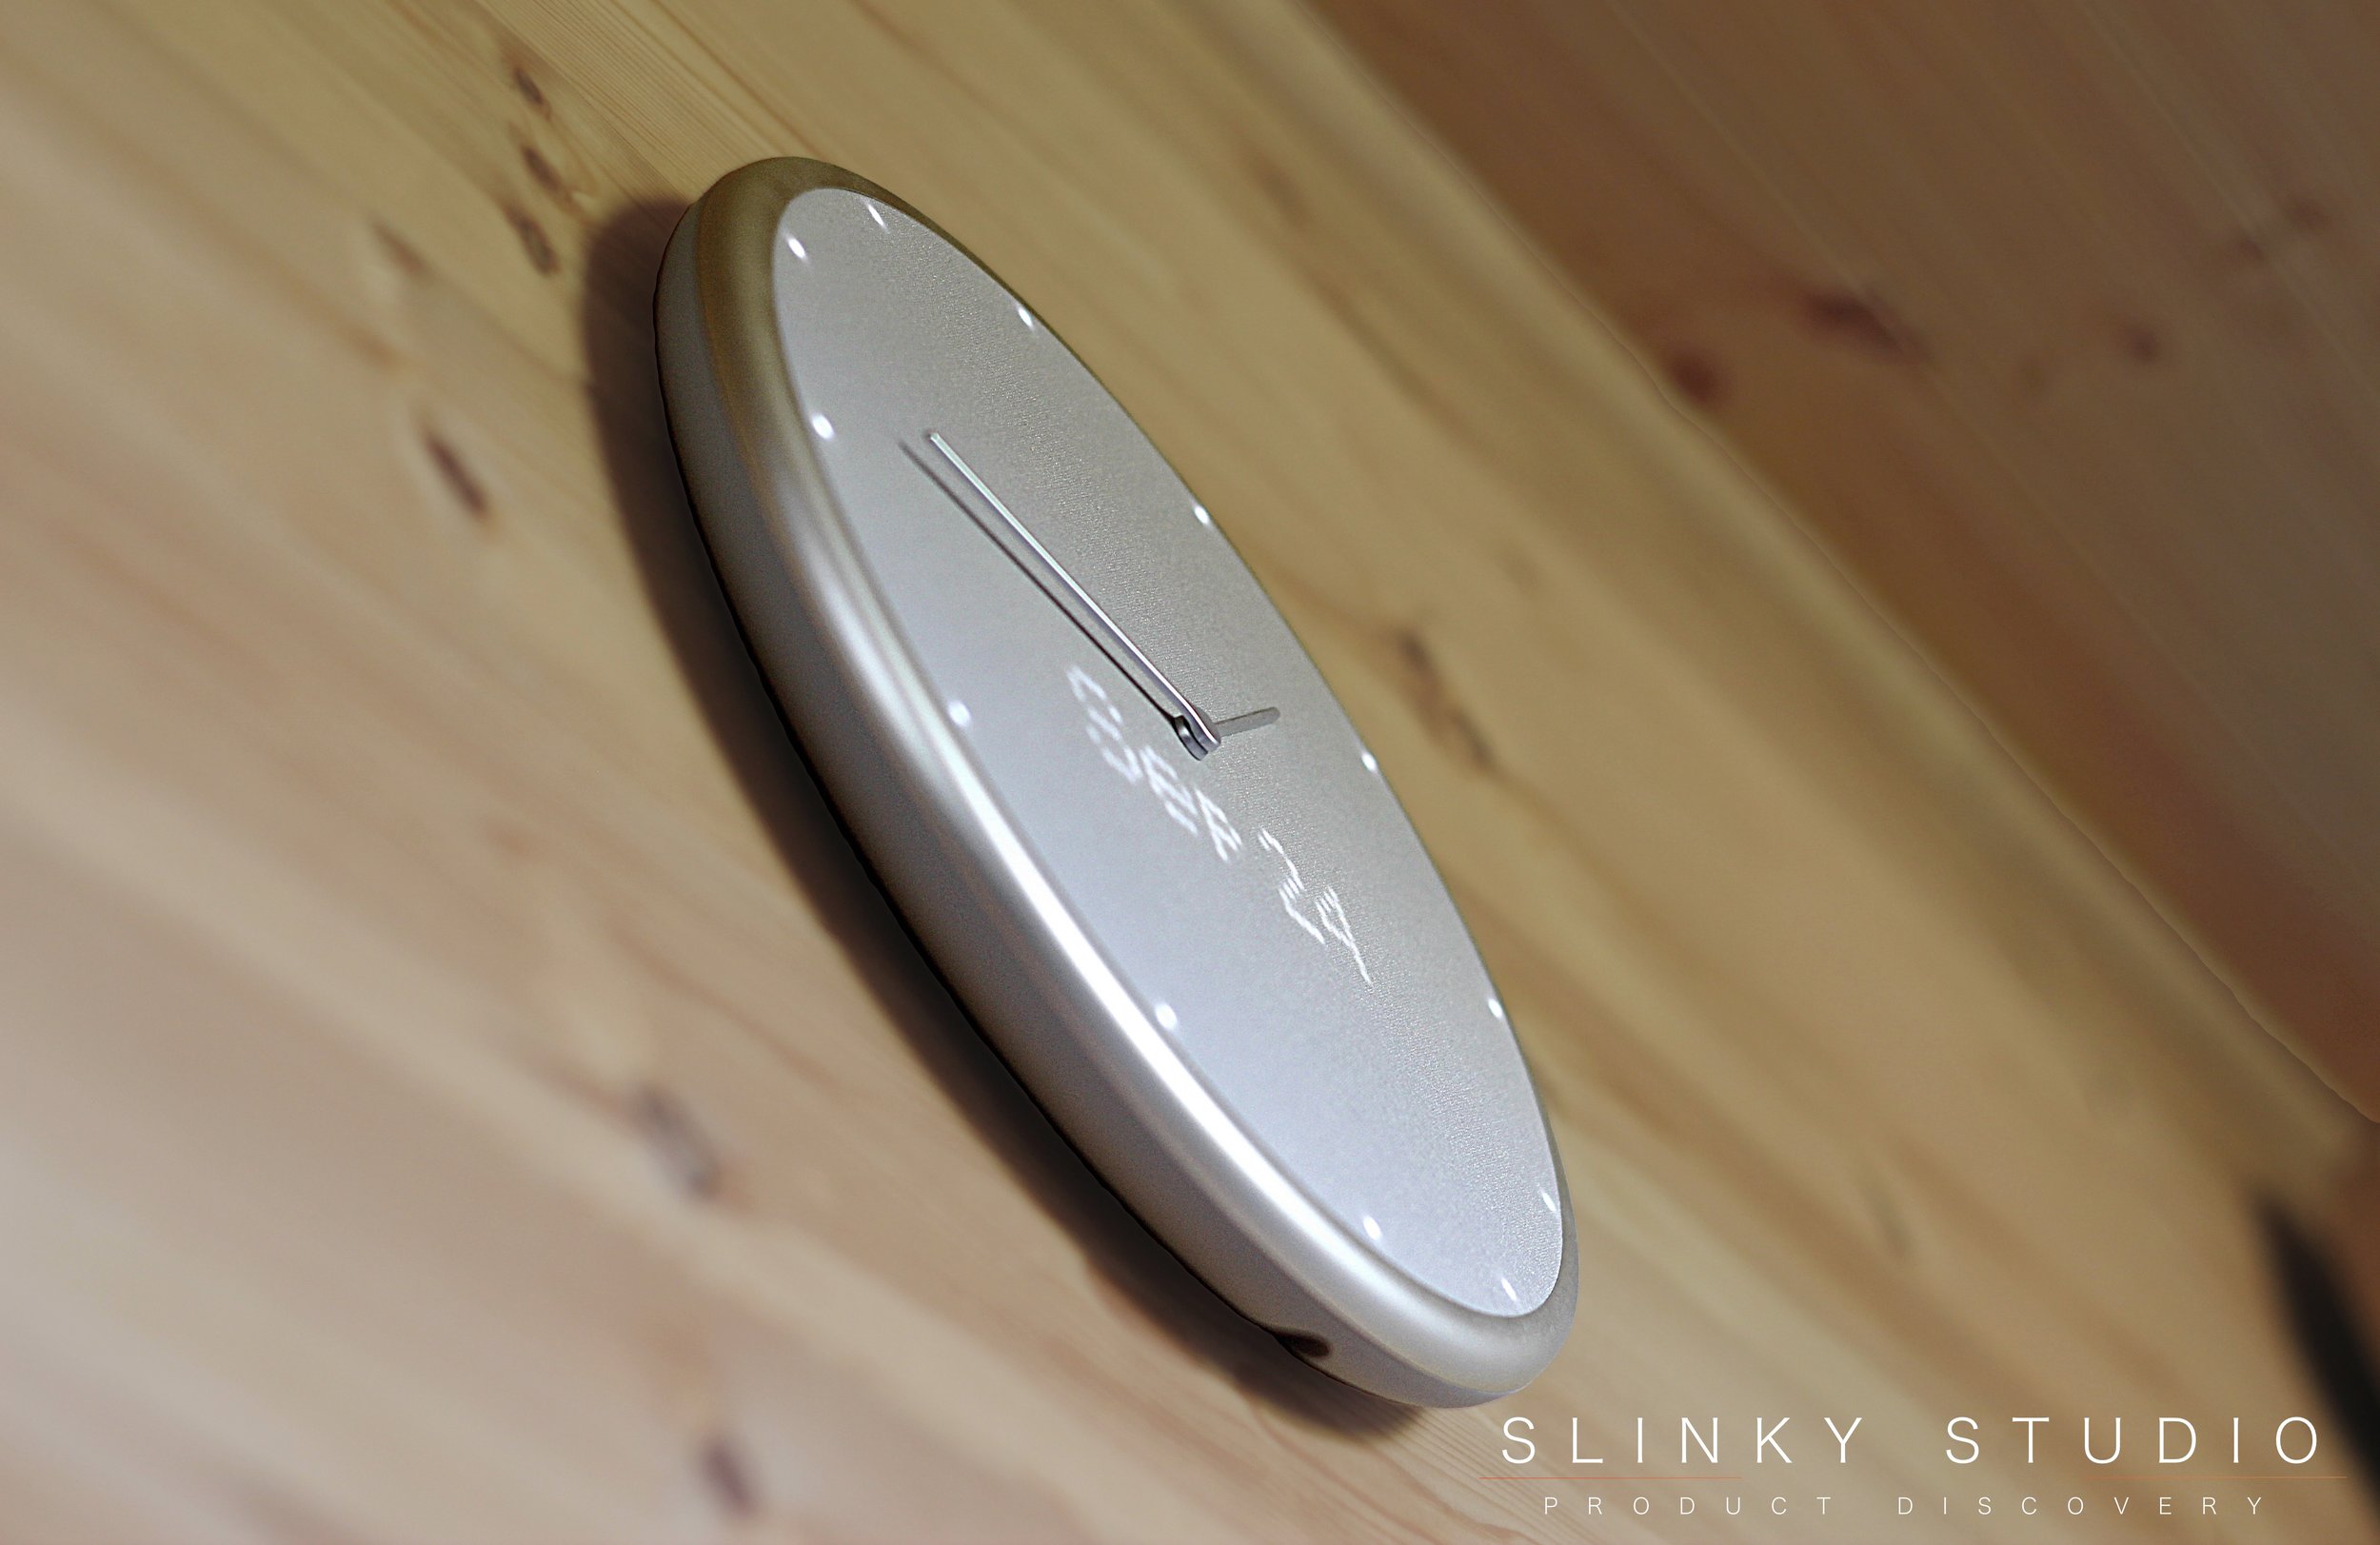 Glance Clock Hanging on Wooden Wall Close Up.jpg